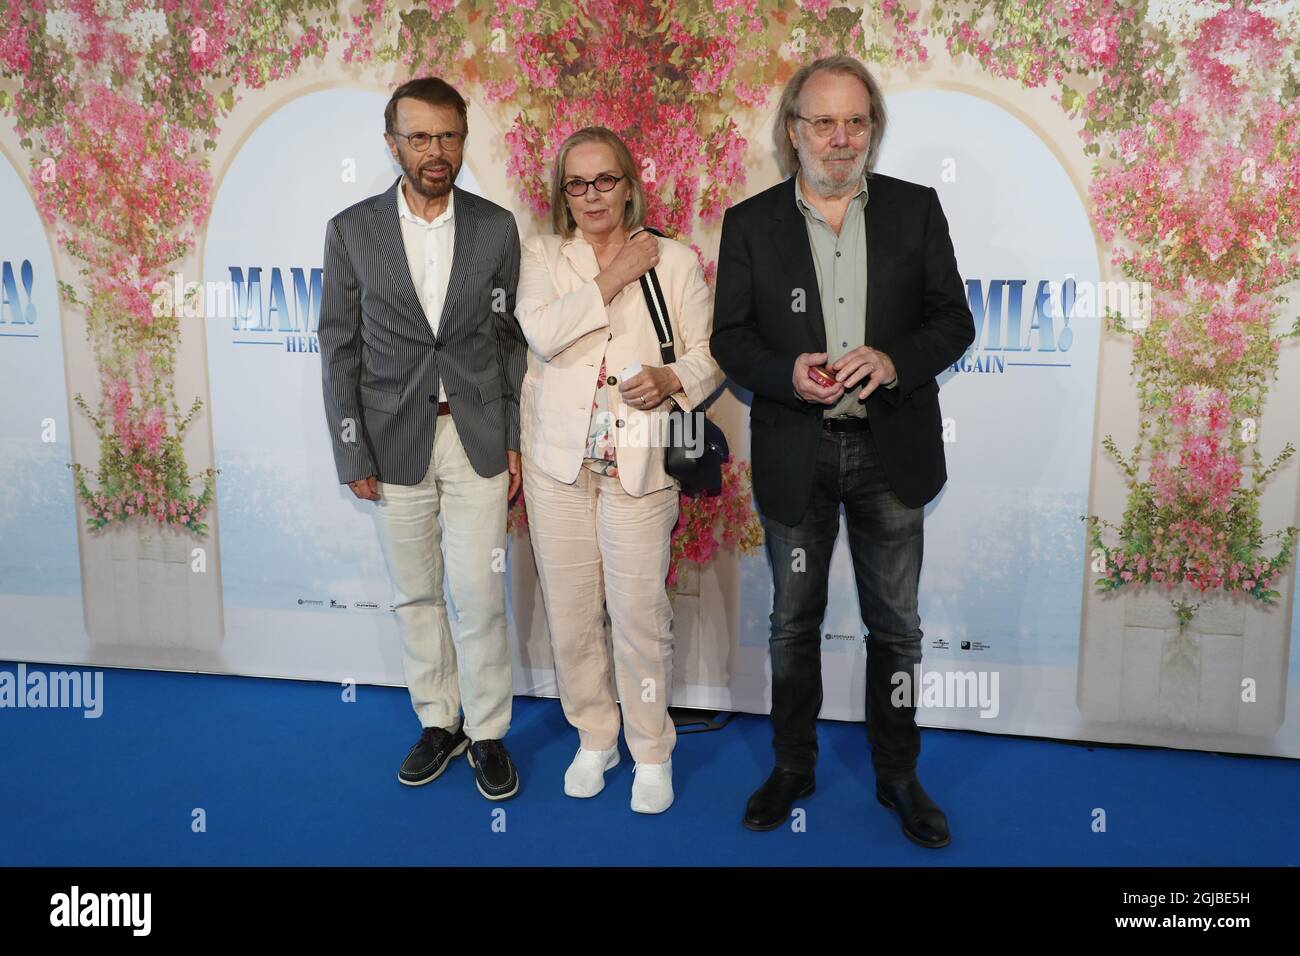 STOCKHOLM 20180711 Bjorn Ulvaeus, Benny Andersson and his wife Mona Norklit  at the gala premiere of '